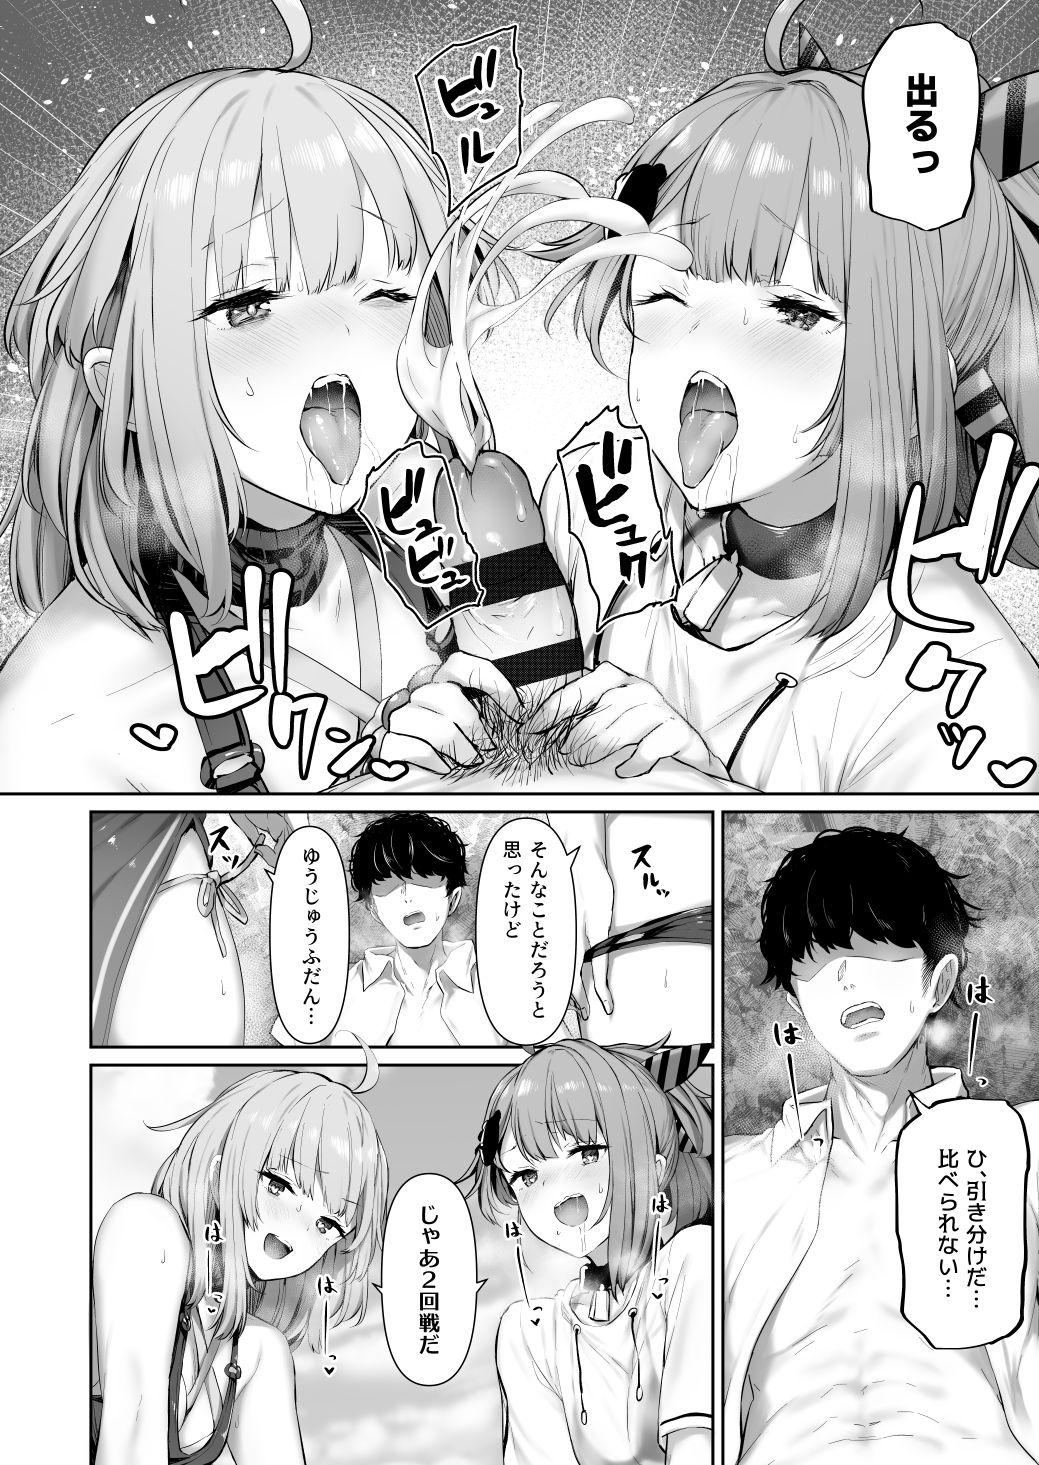 Ethnic MP7 and AA-12 - Girls frontline Big Black Dick - Page 6